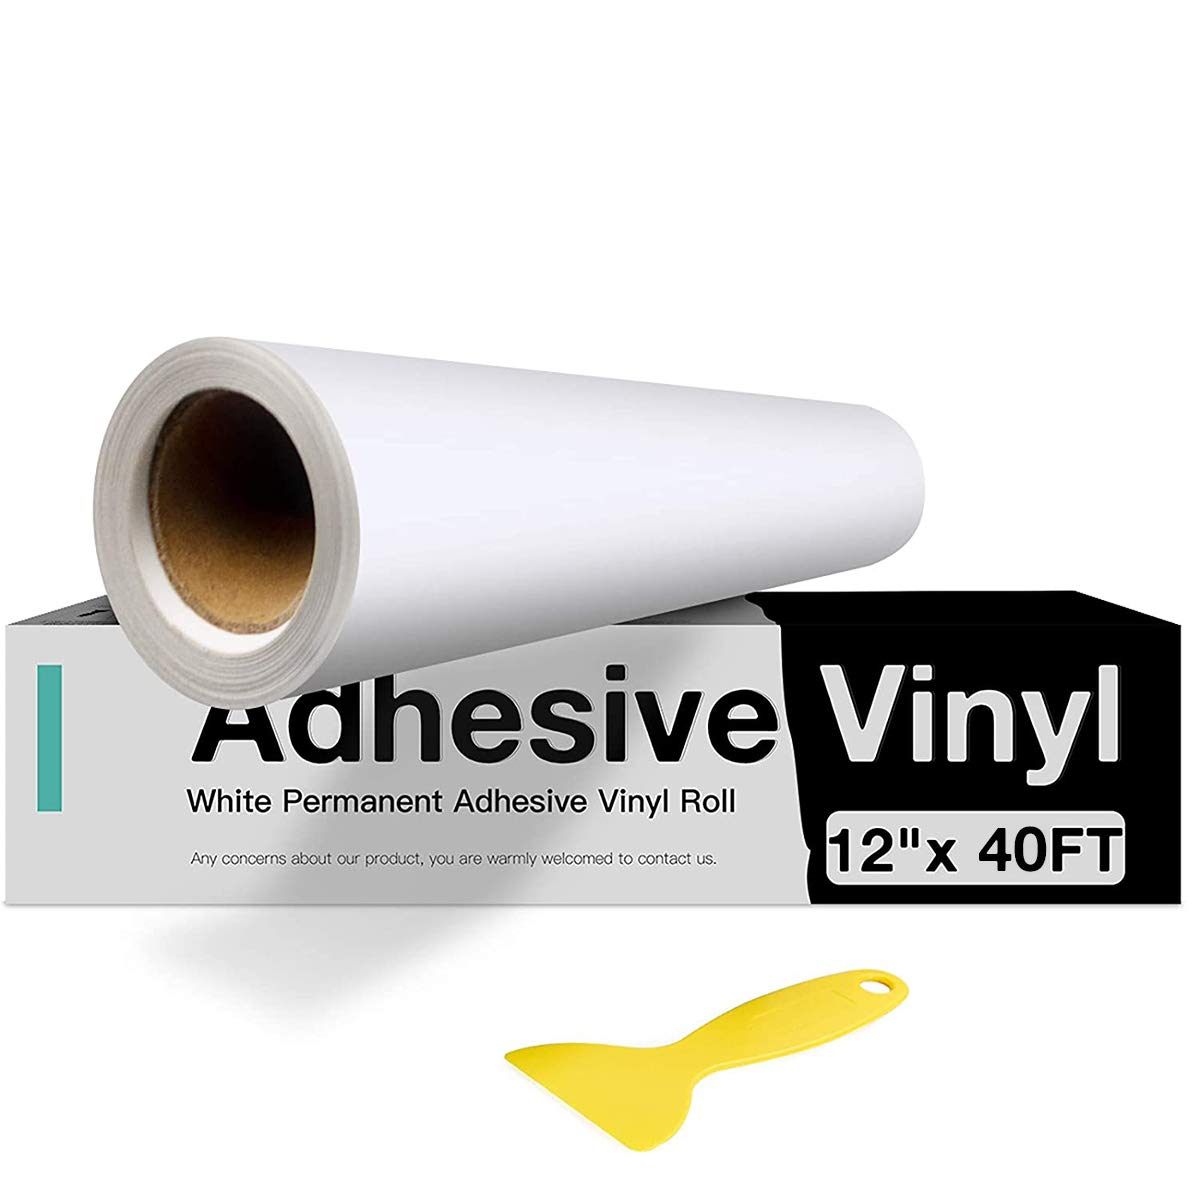 White Permanent Vinyl White Adhesive Vinyl for Cricut - 12 x 40 FT White Vinyl  Roll for Cricut Silhouette Cameo Cutters Signs Scrapbooking Craft Die  Cutters Matte White